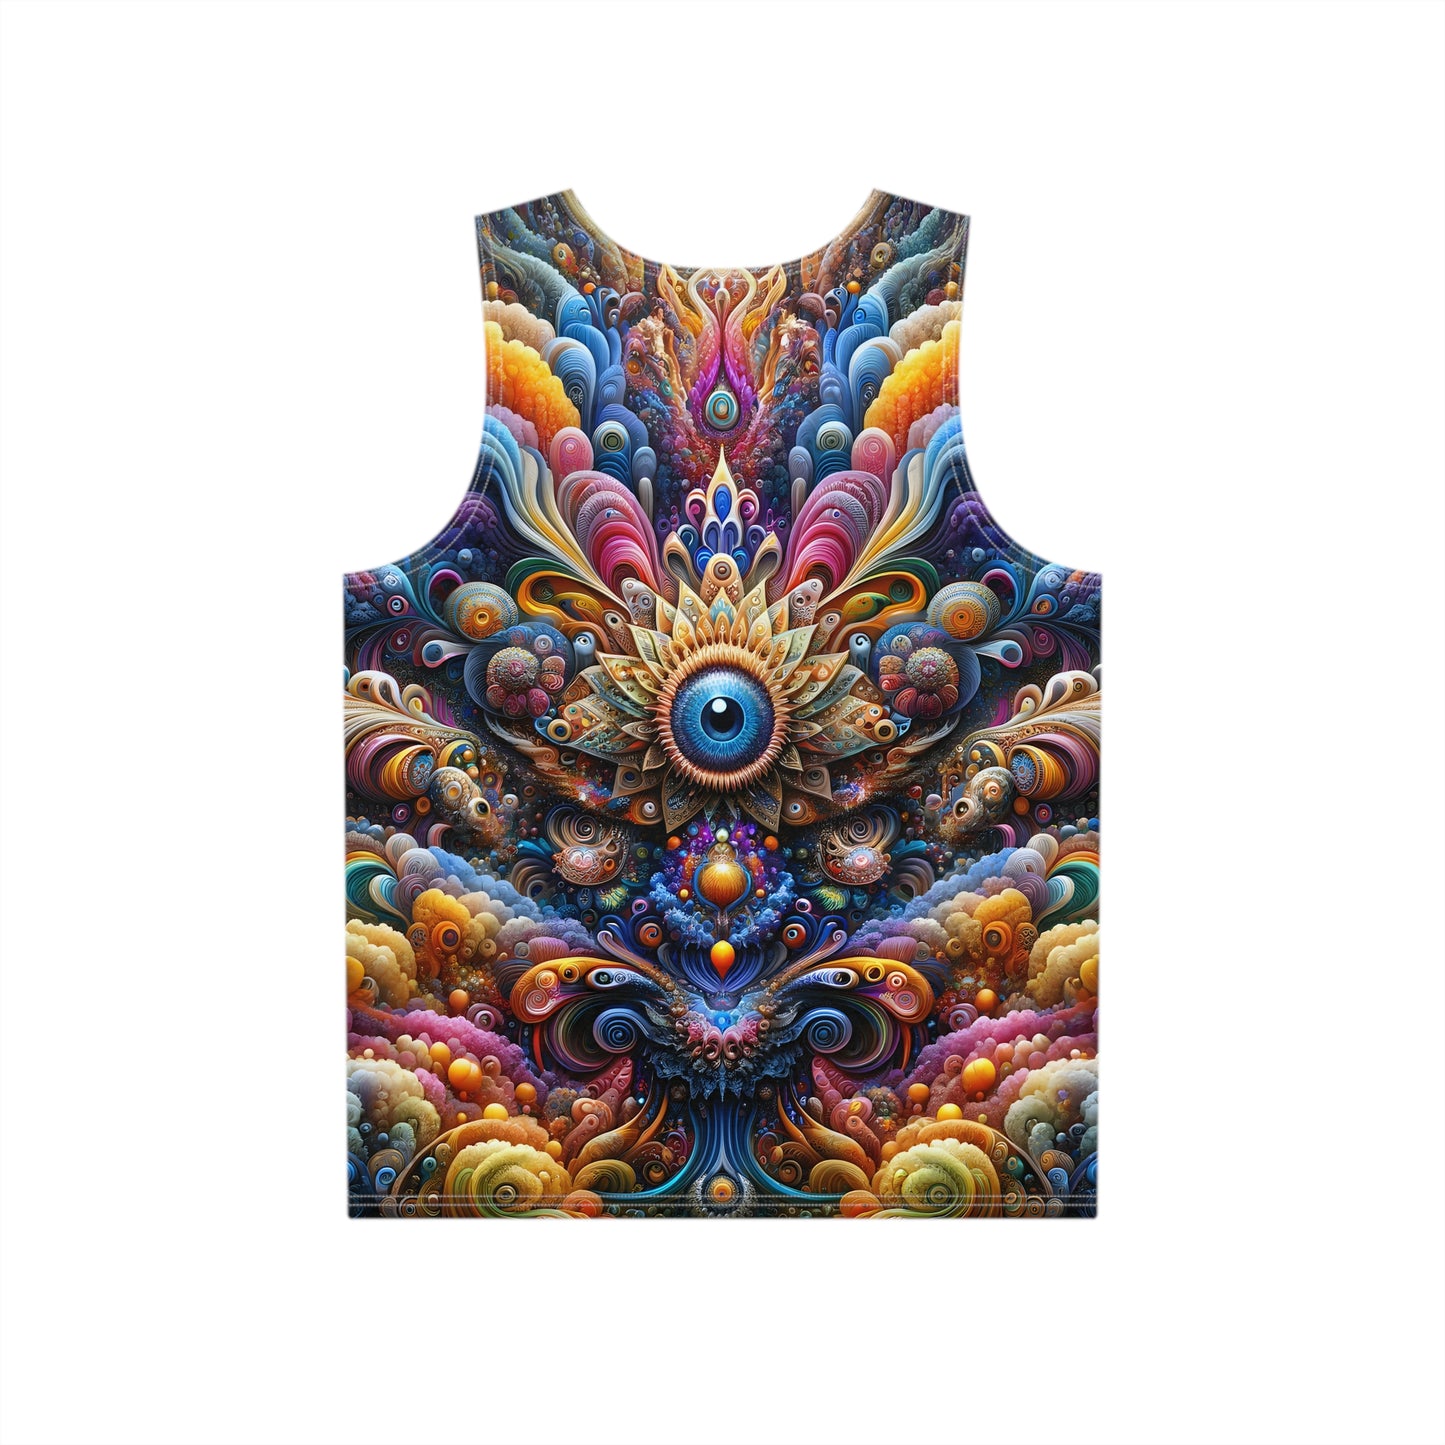 Jewel Eye Flourishing Full All Over Print Visionary Psychedelic Art Men's and Women's Unisex Tank Top T-Shirt for Festival and Street Wear